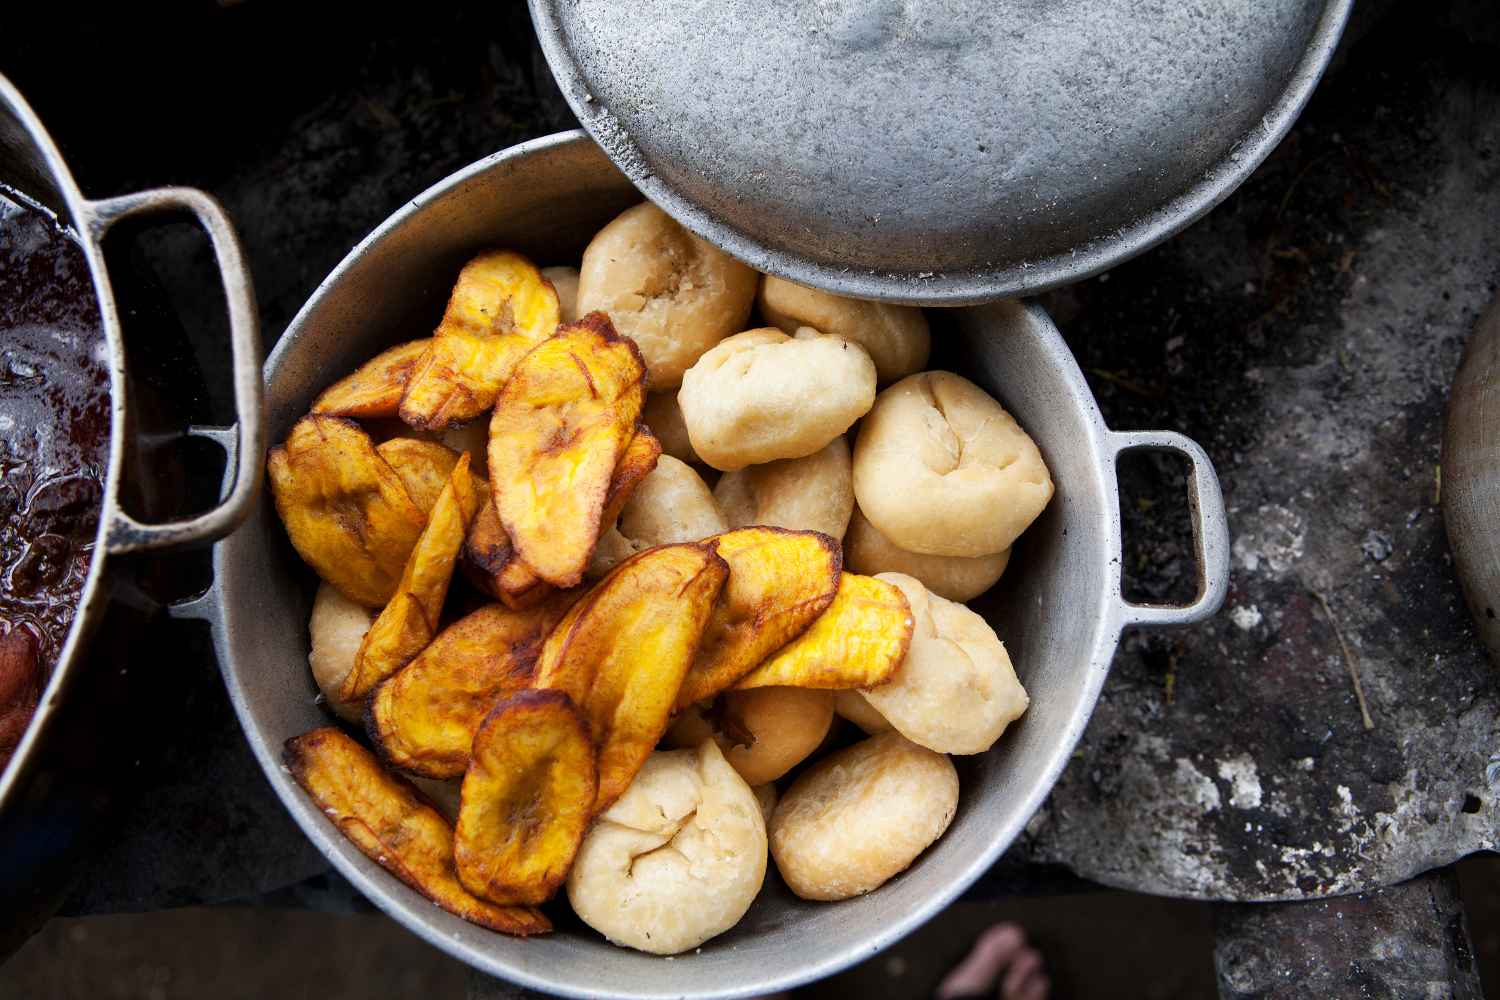 Local root vegetable plantain makes its way into many Caribbean dishes. Image by Blend Images/John / Getty